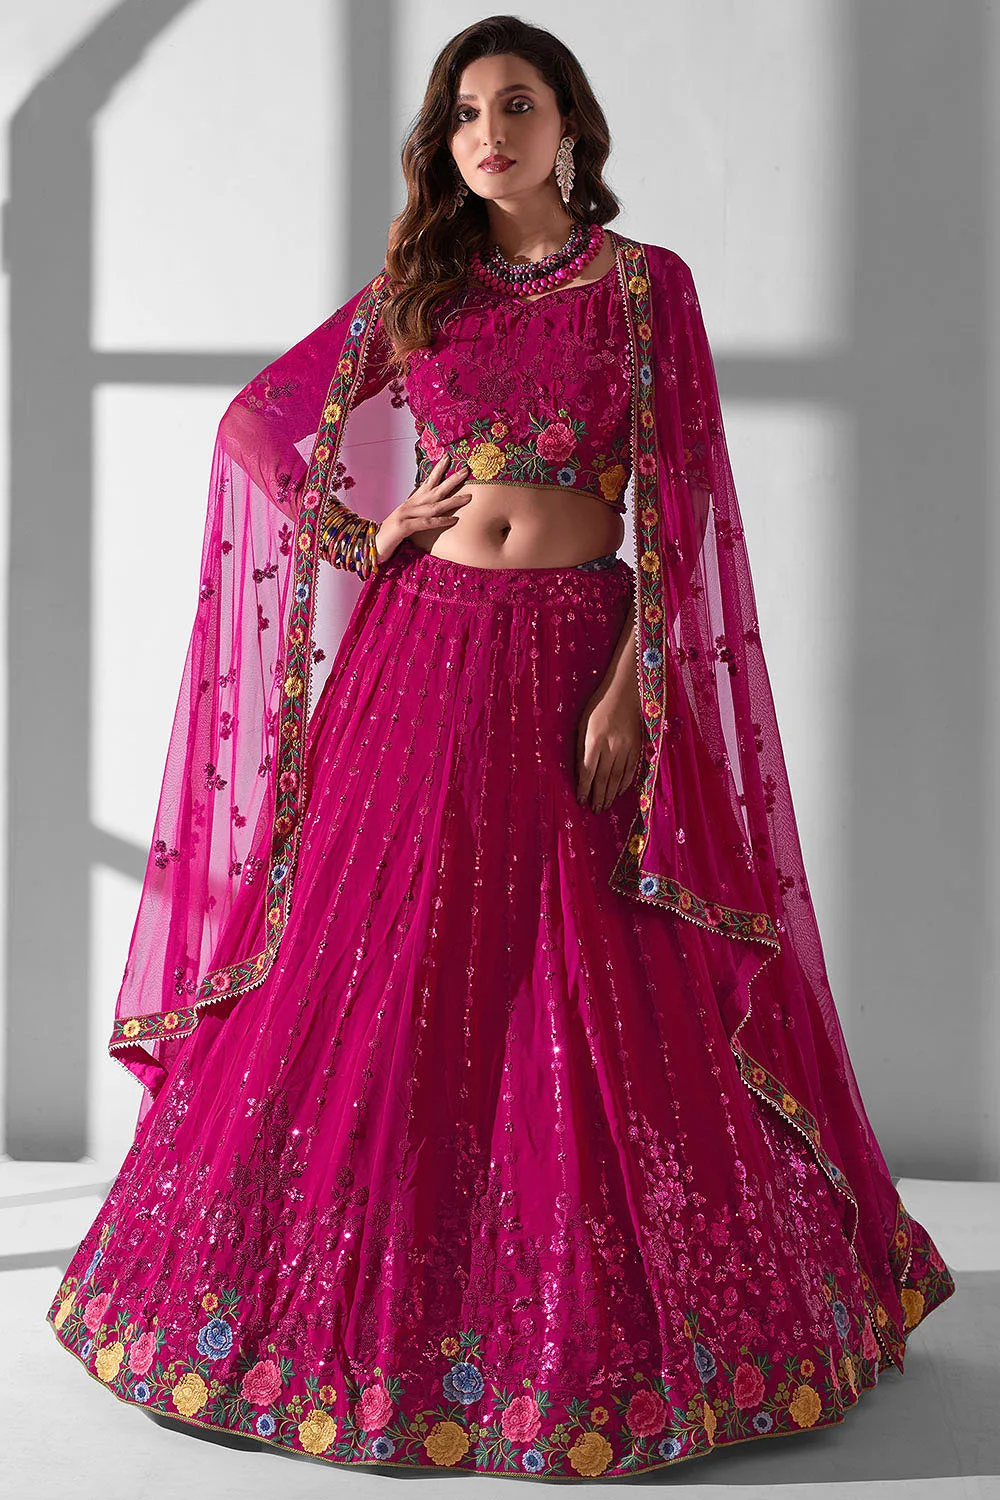 Big Flair Georgette Lehenga in Wine with Sequins & Multi-Embroidery